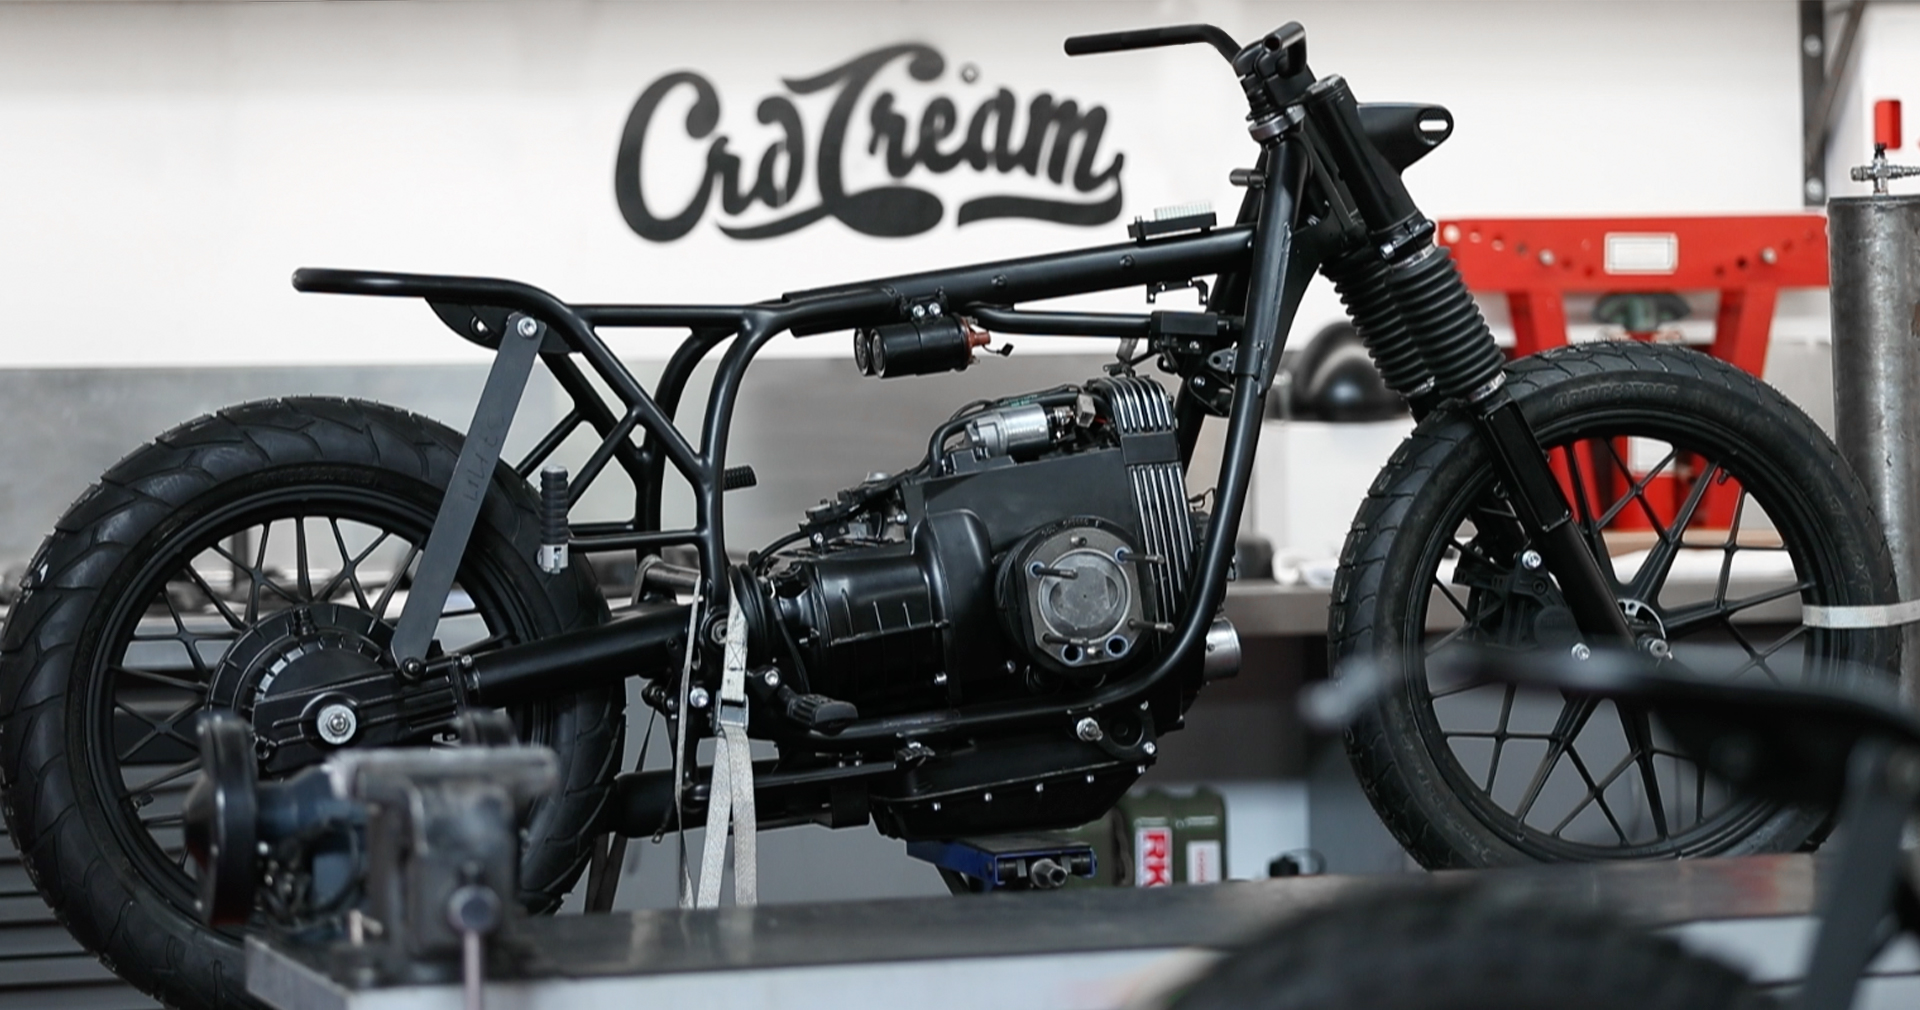 How to order a CRD - Cafe Racer Dreams